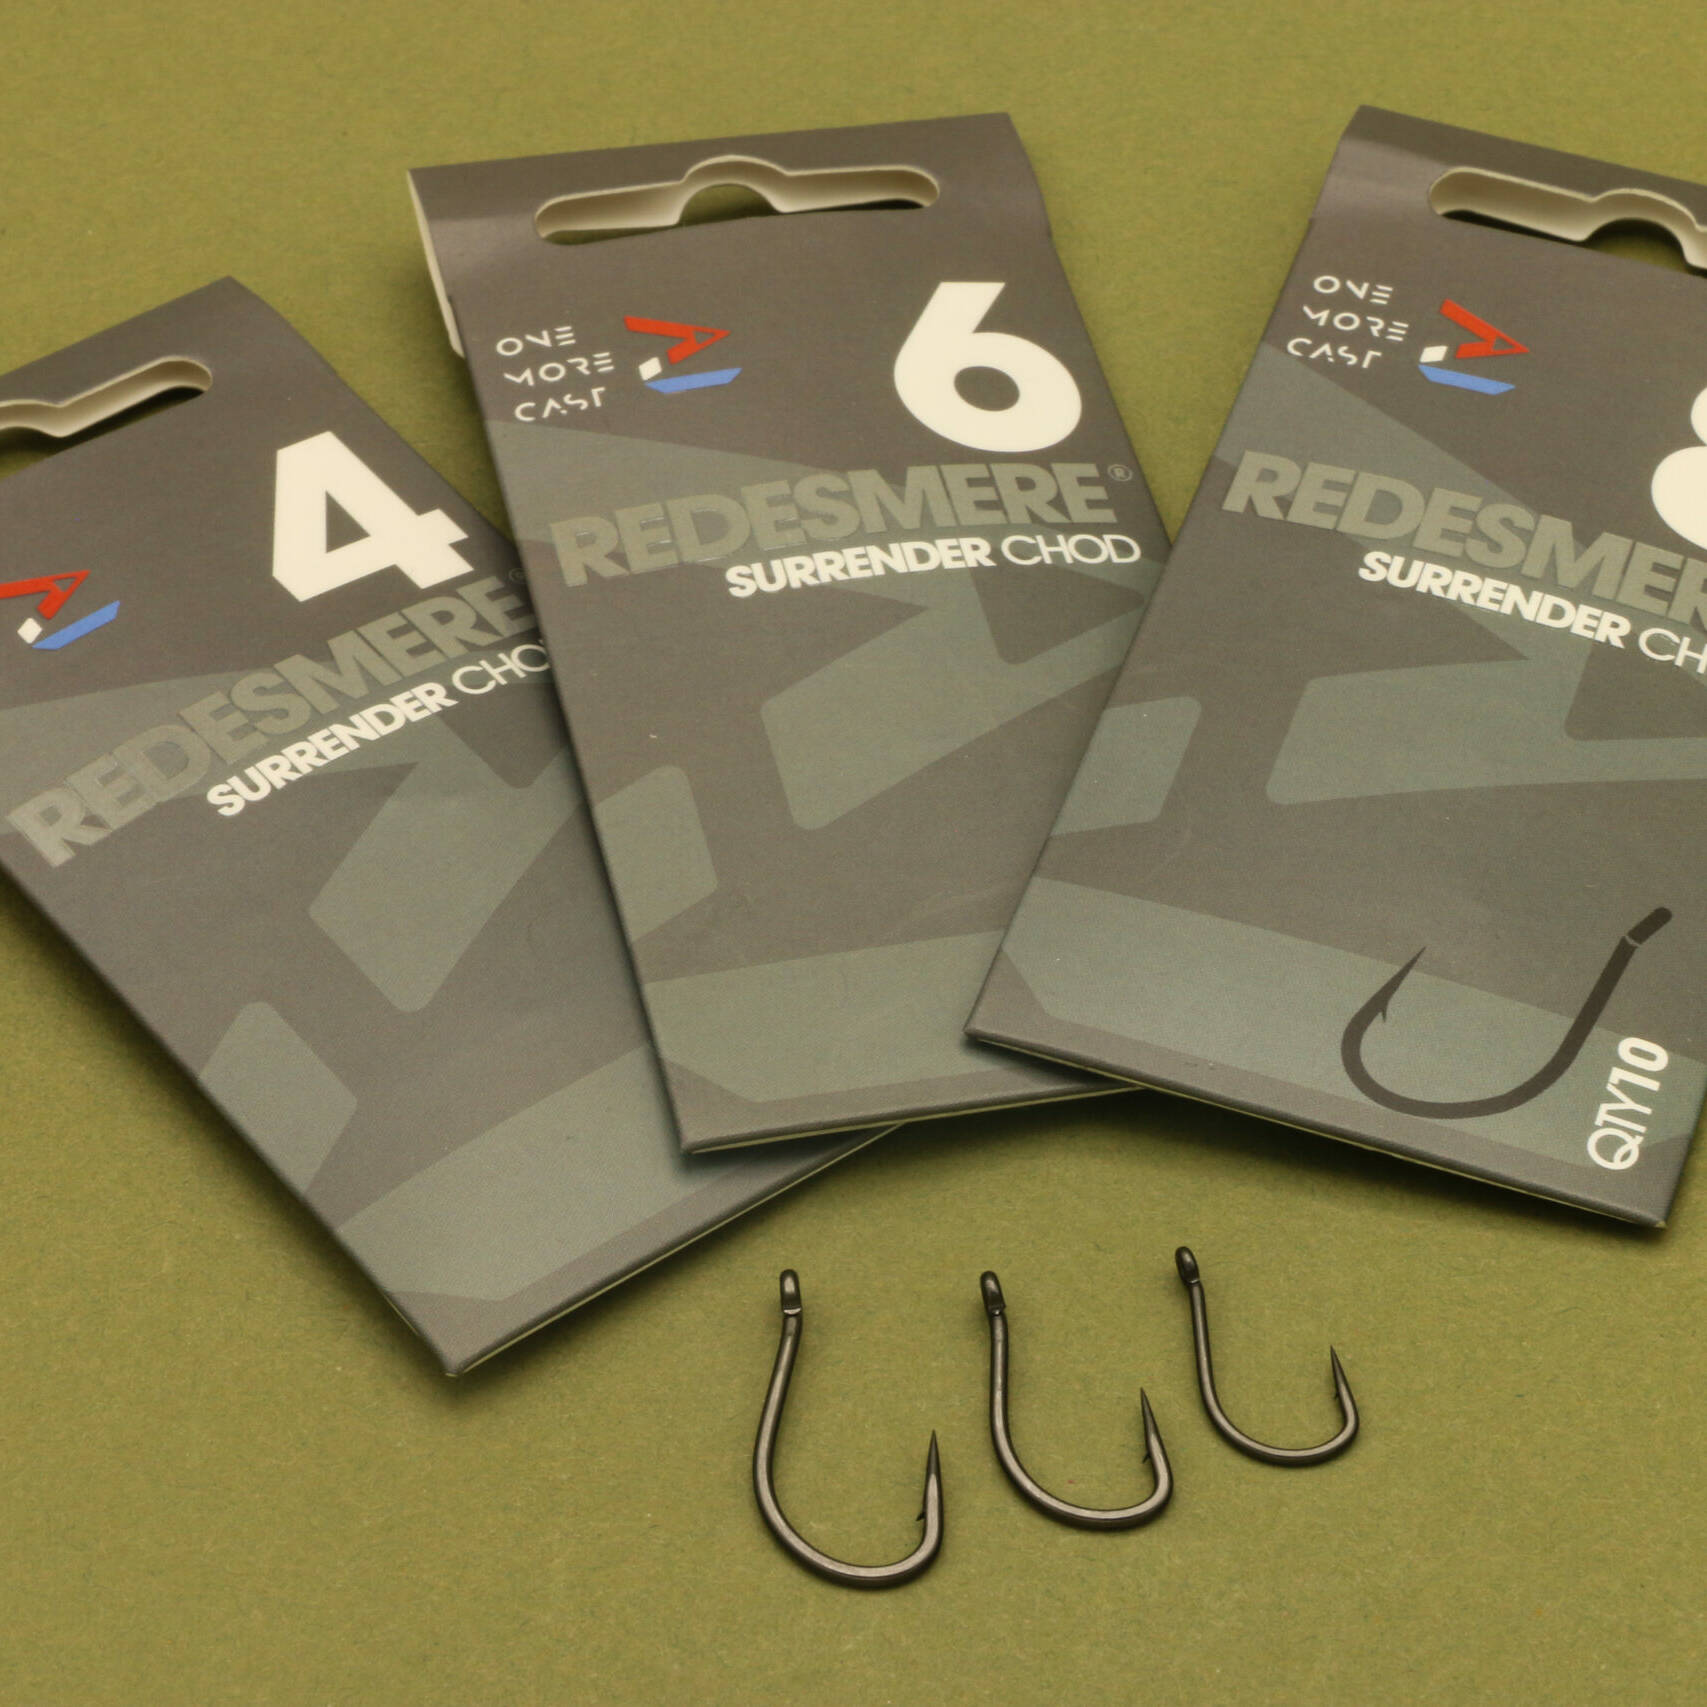 OMC REDESMERE Hooks (chod hook) Size 8